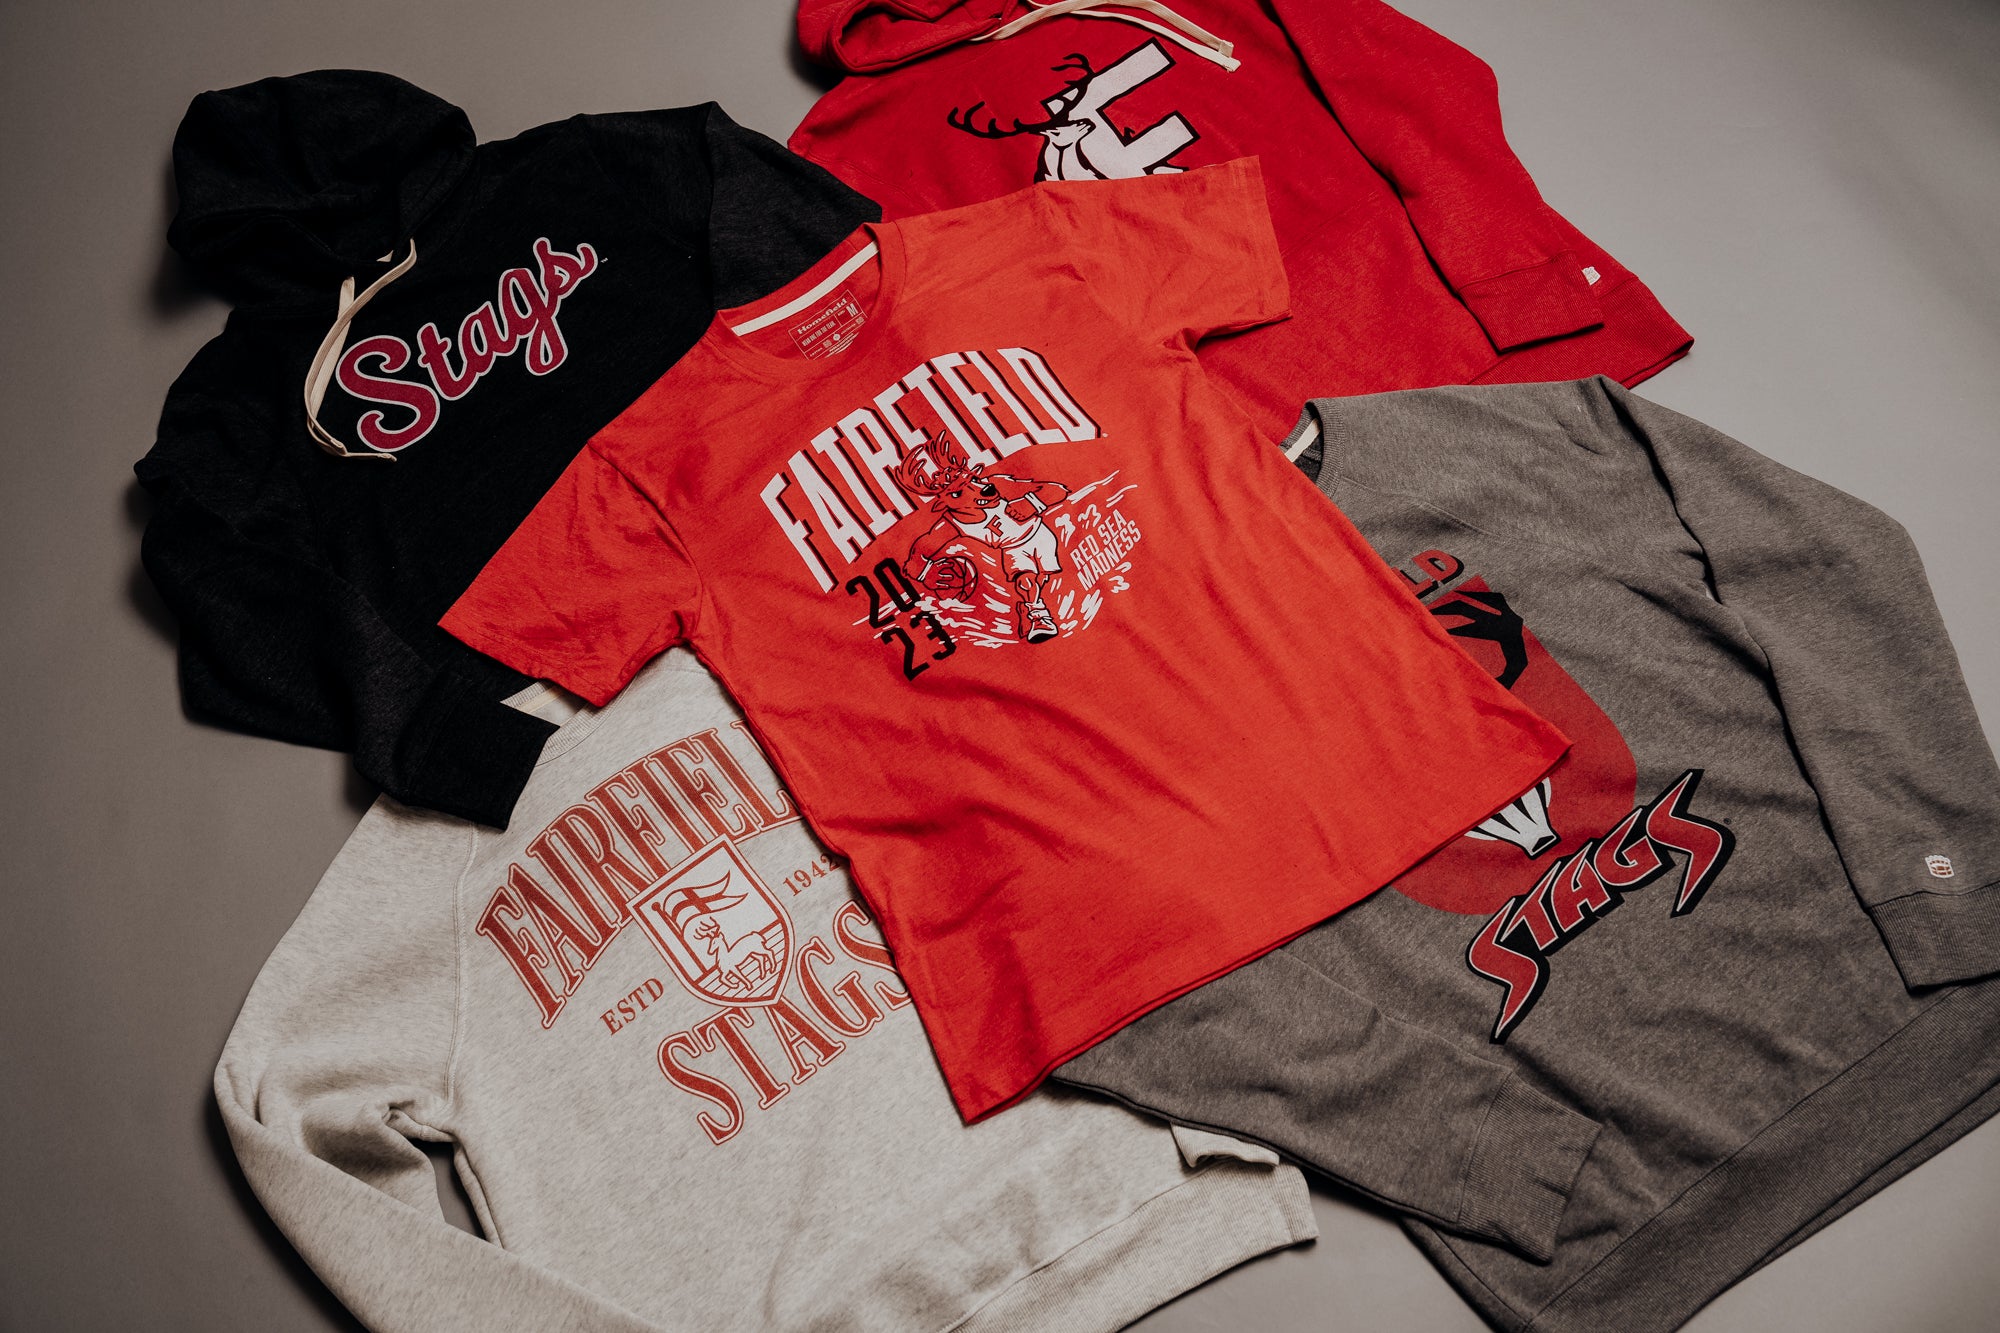 Chicago Stags Basketball Apparel Store